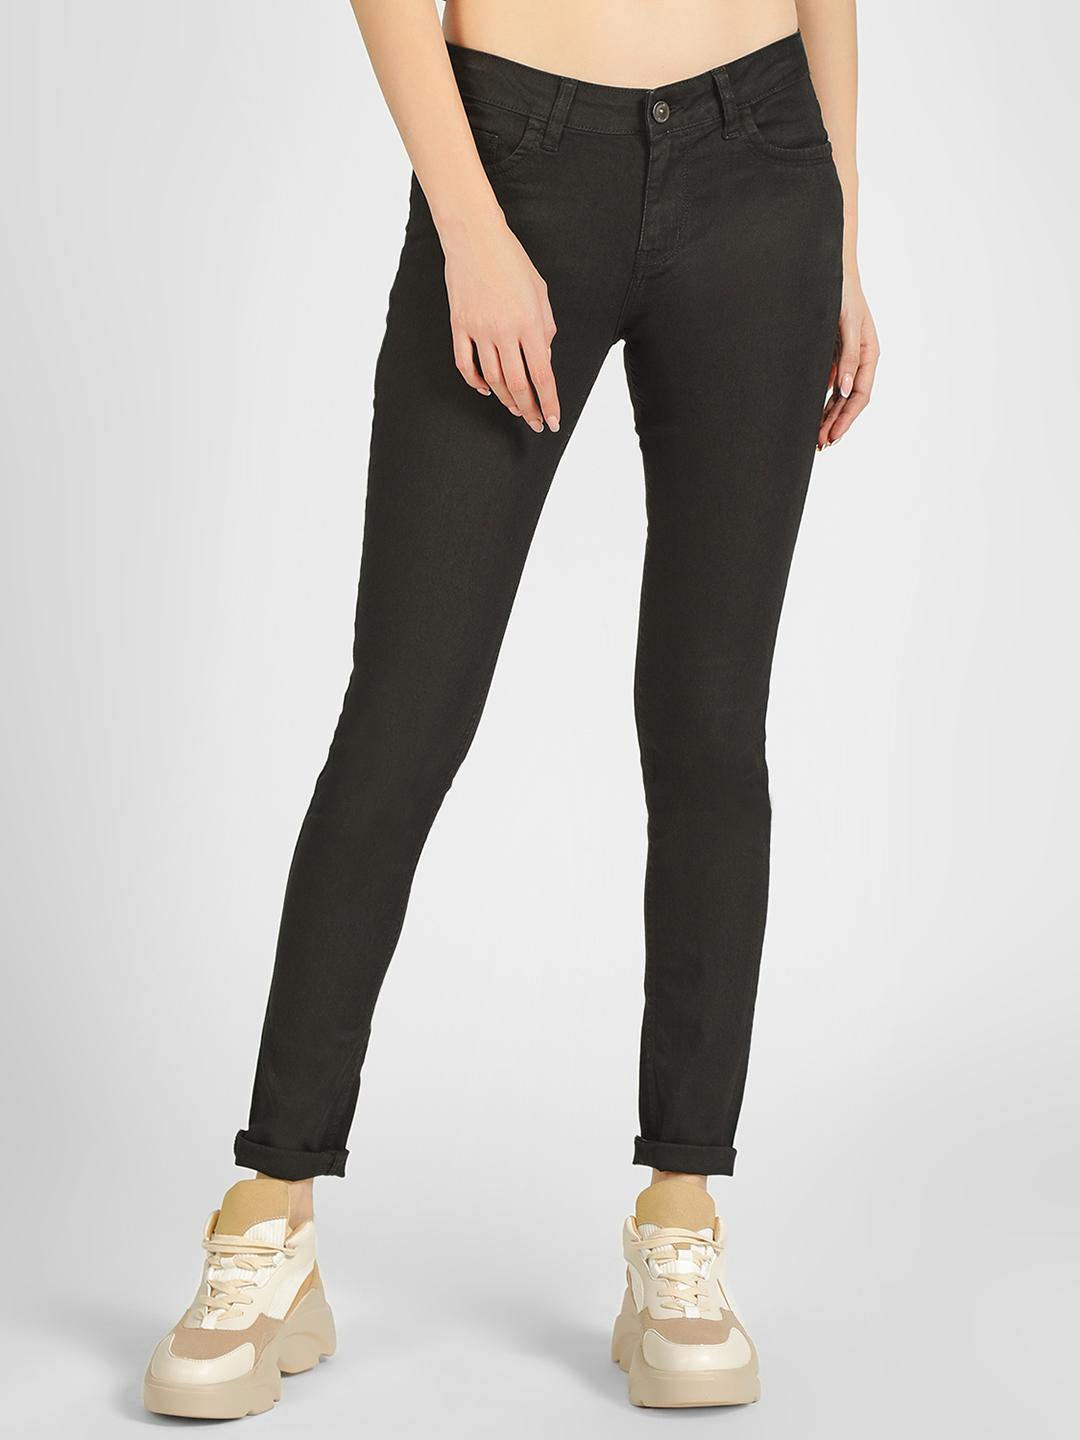 Women's Jeans Rs.100 After Cashback